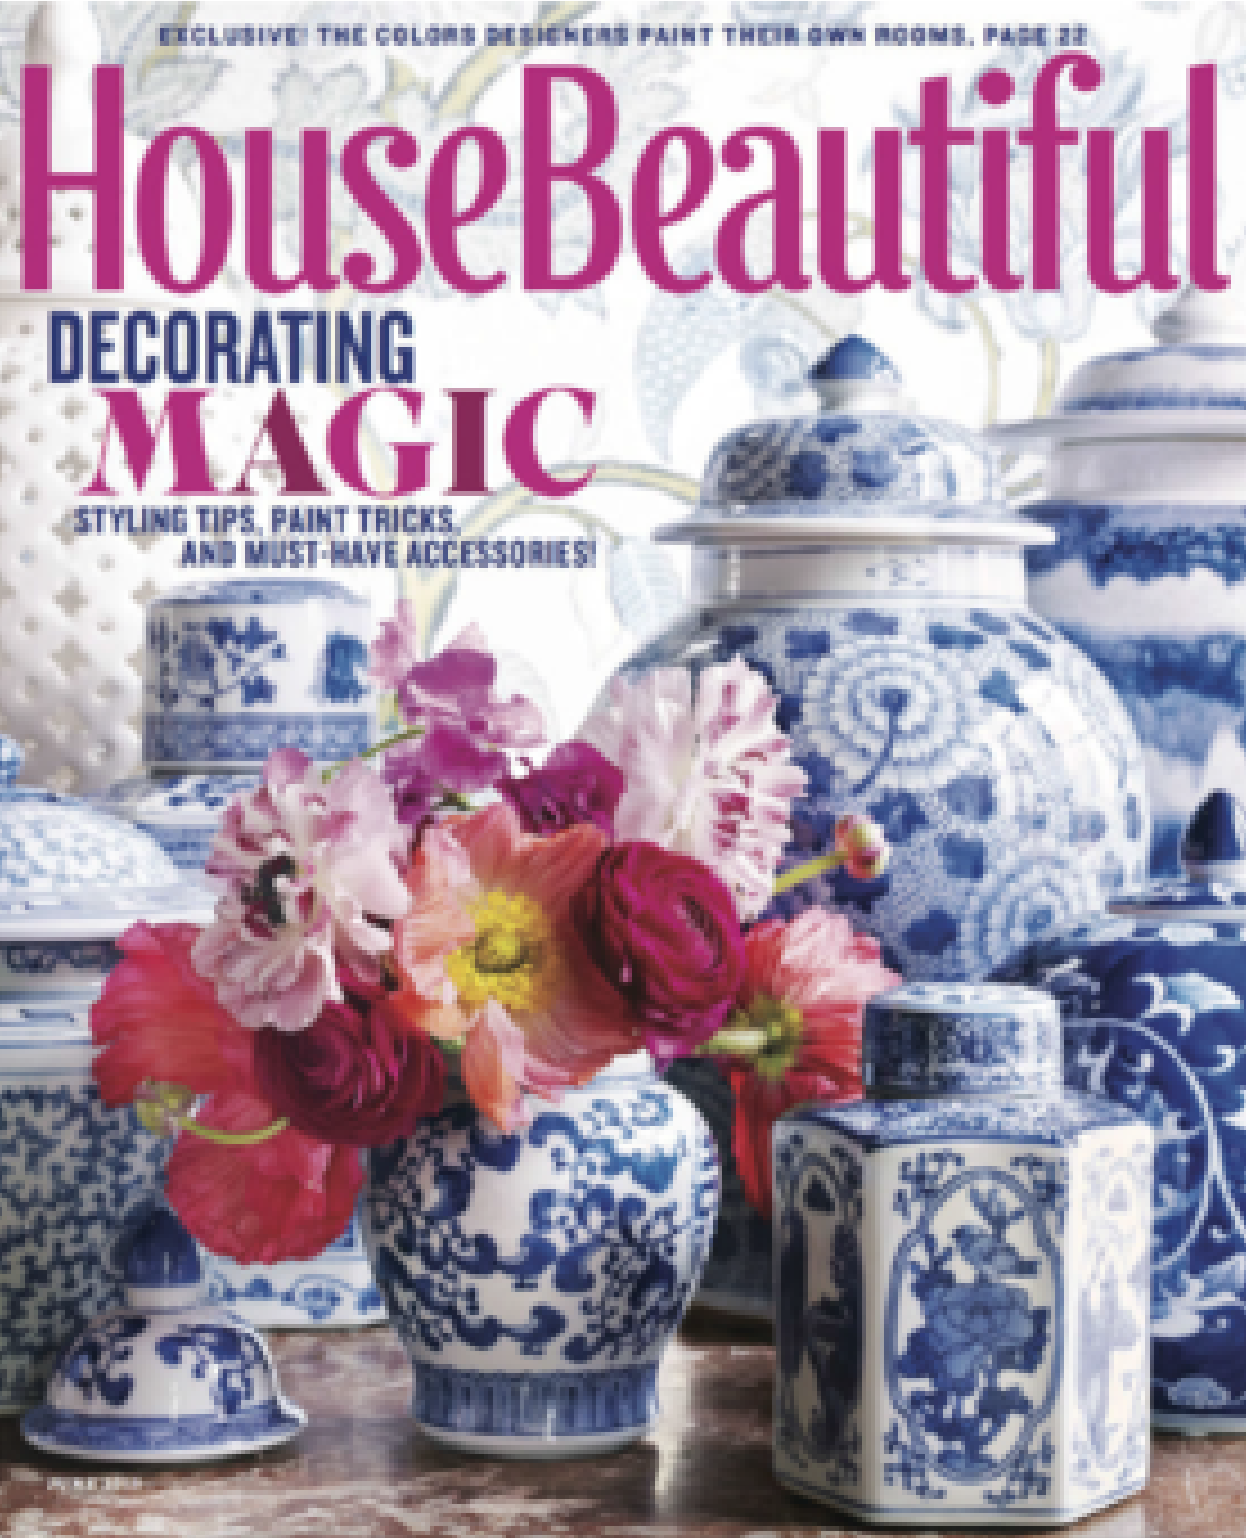 HouseBeautiful_cover.png